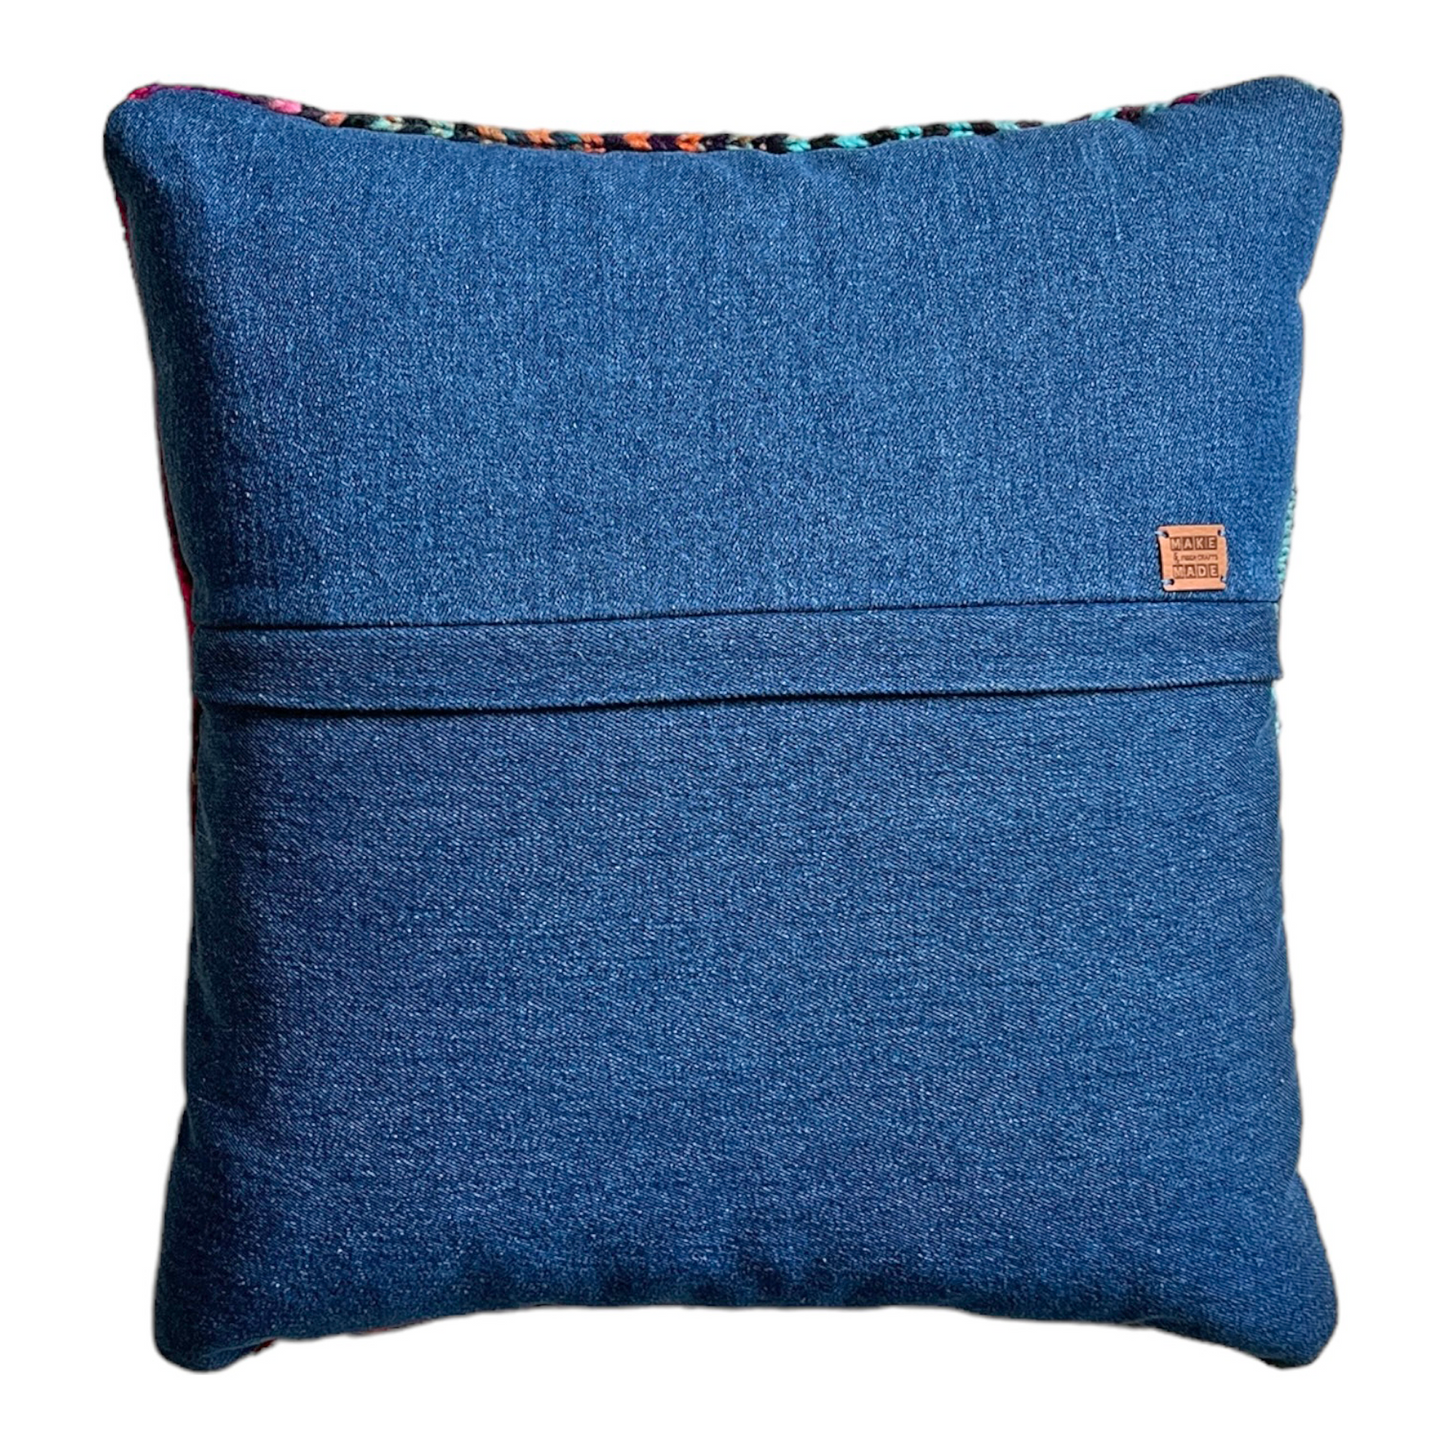 The back side of this pillow is a blue cotton denim. A hidden zipper runs horizontally through the middle of the pillow and includes a leather Make & Made Fiber Crafts label.